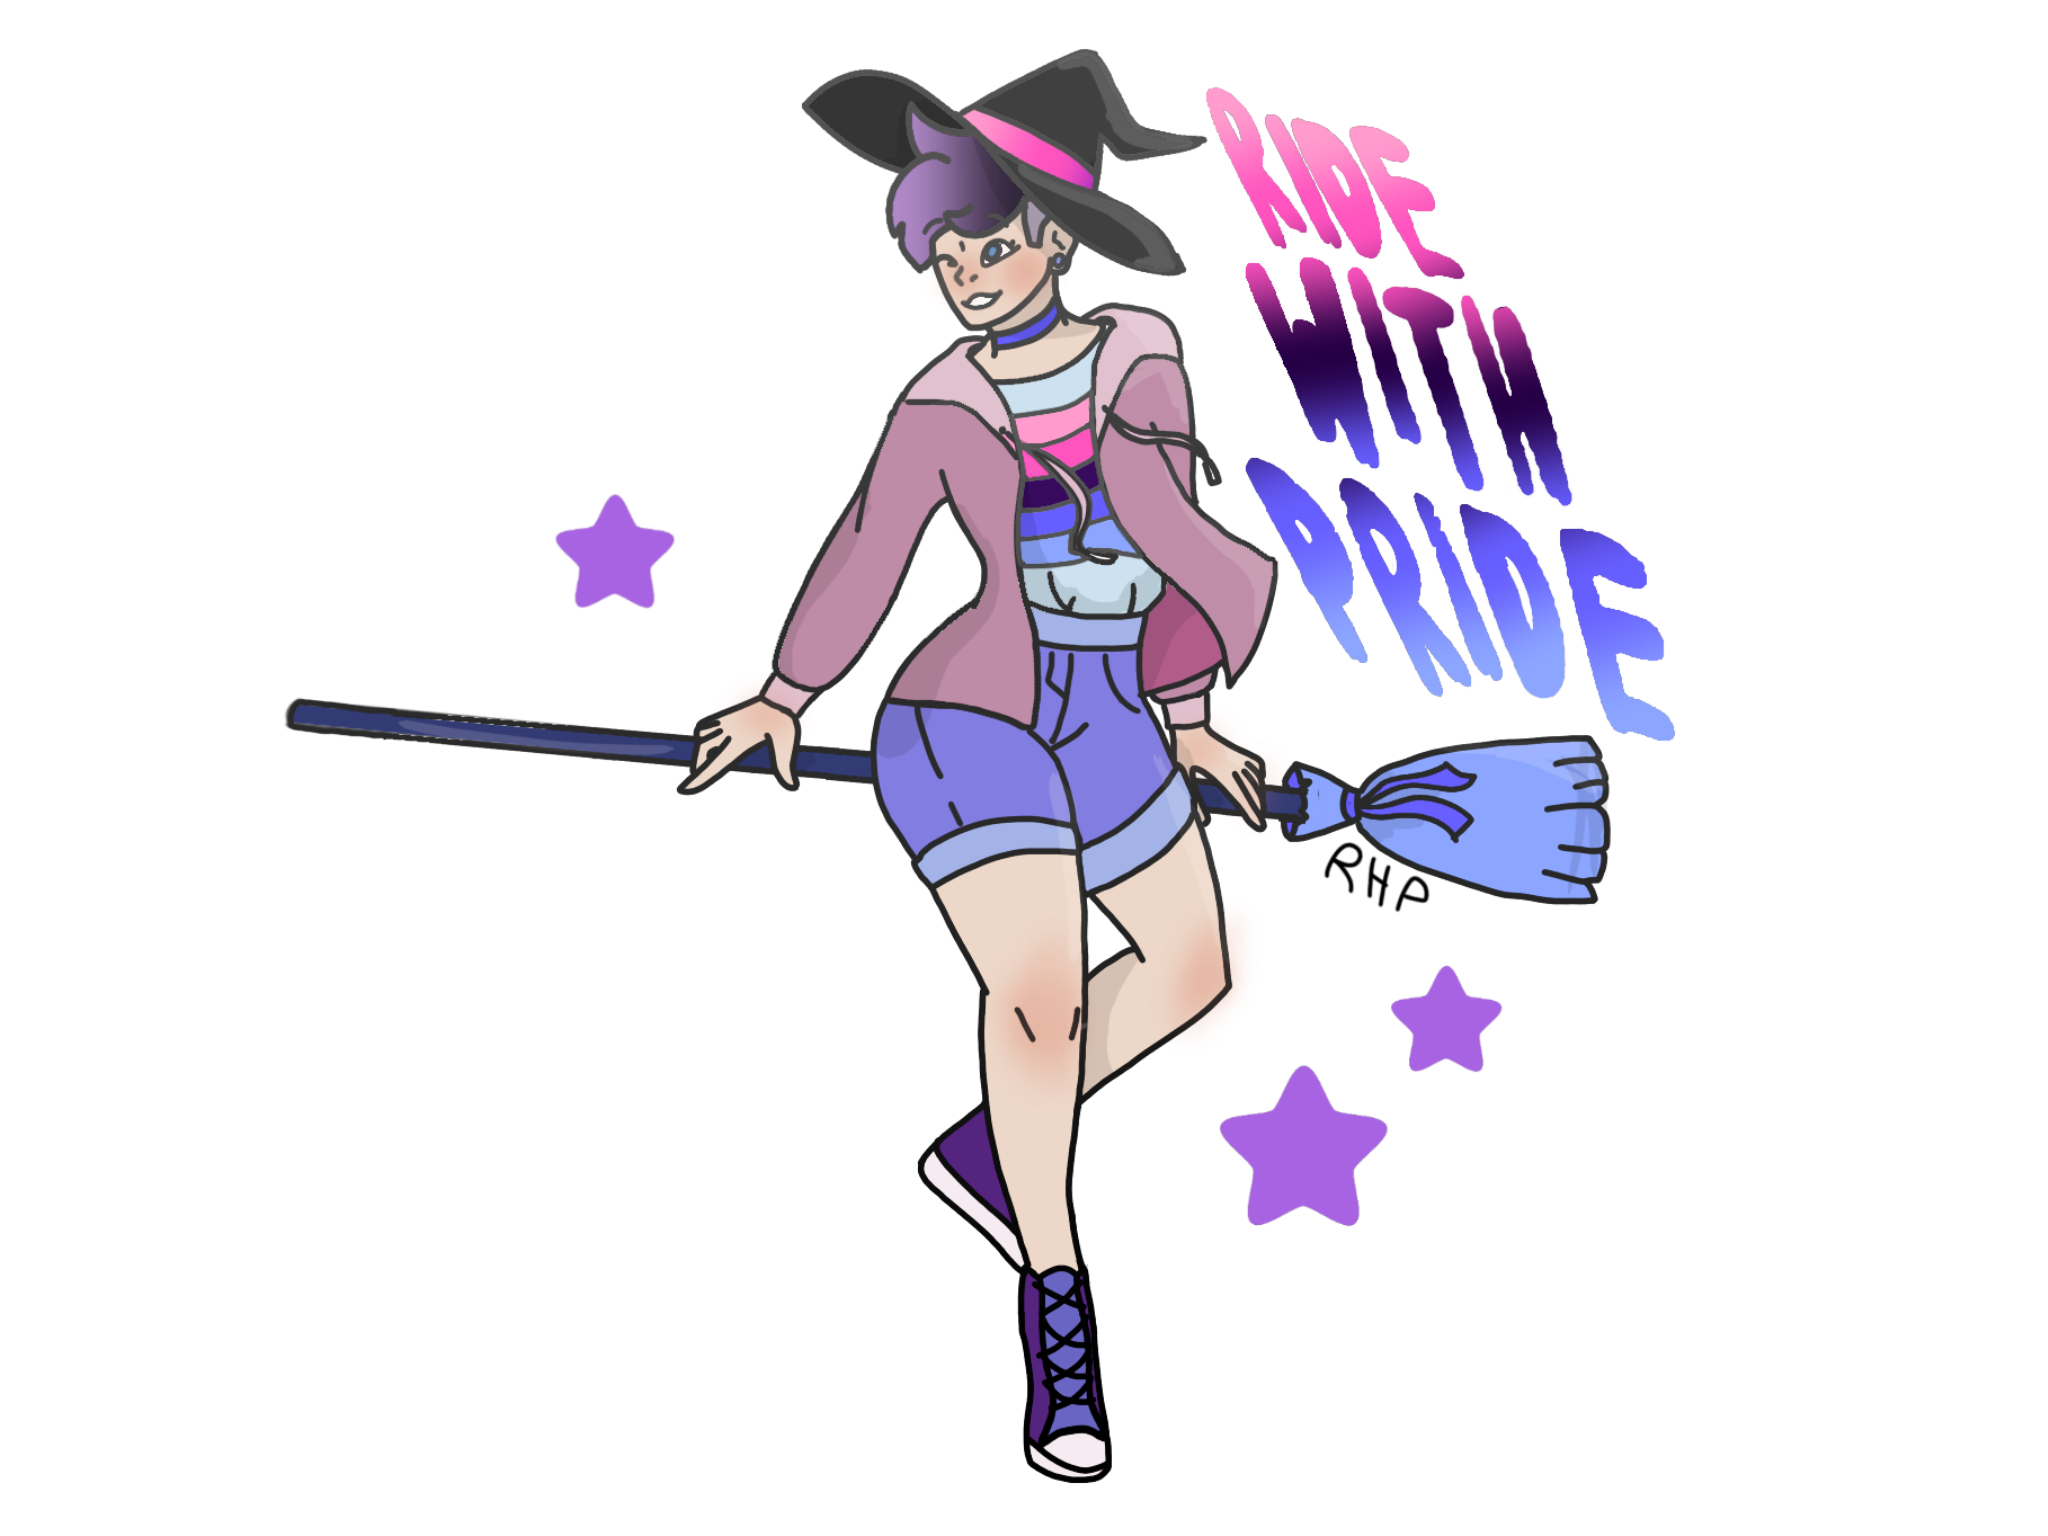 An omnisexual pride witch inspired by ABD Illustrates's amazing Ride With Pride pieces! By me